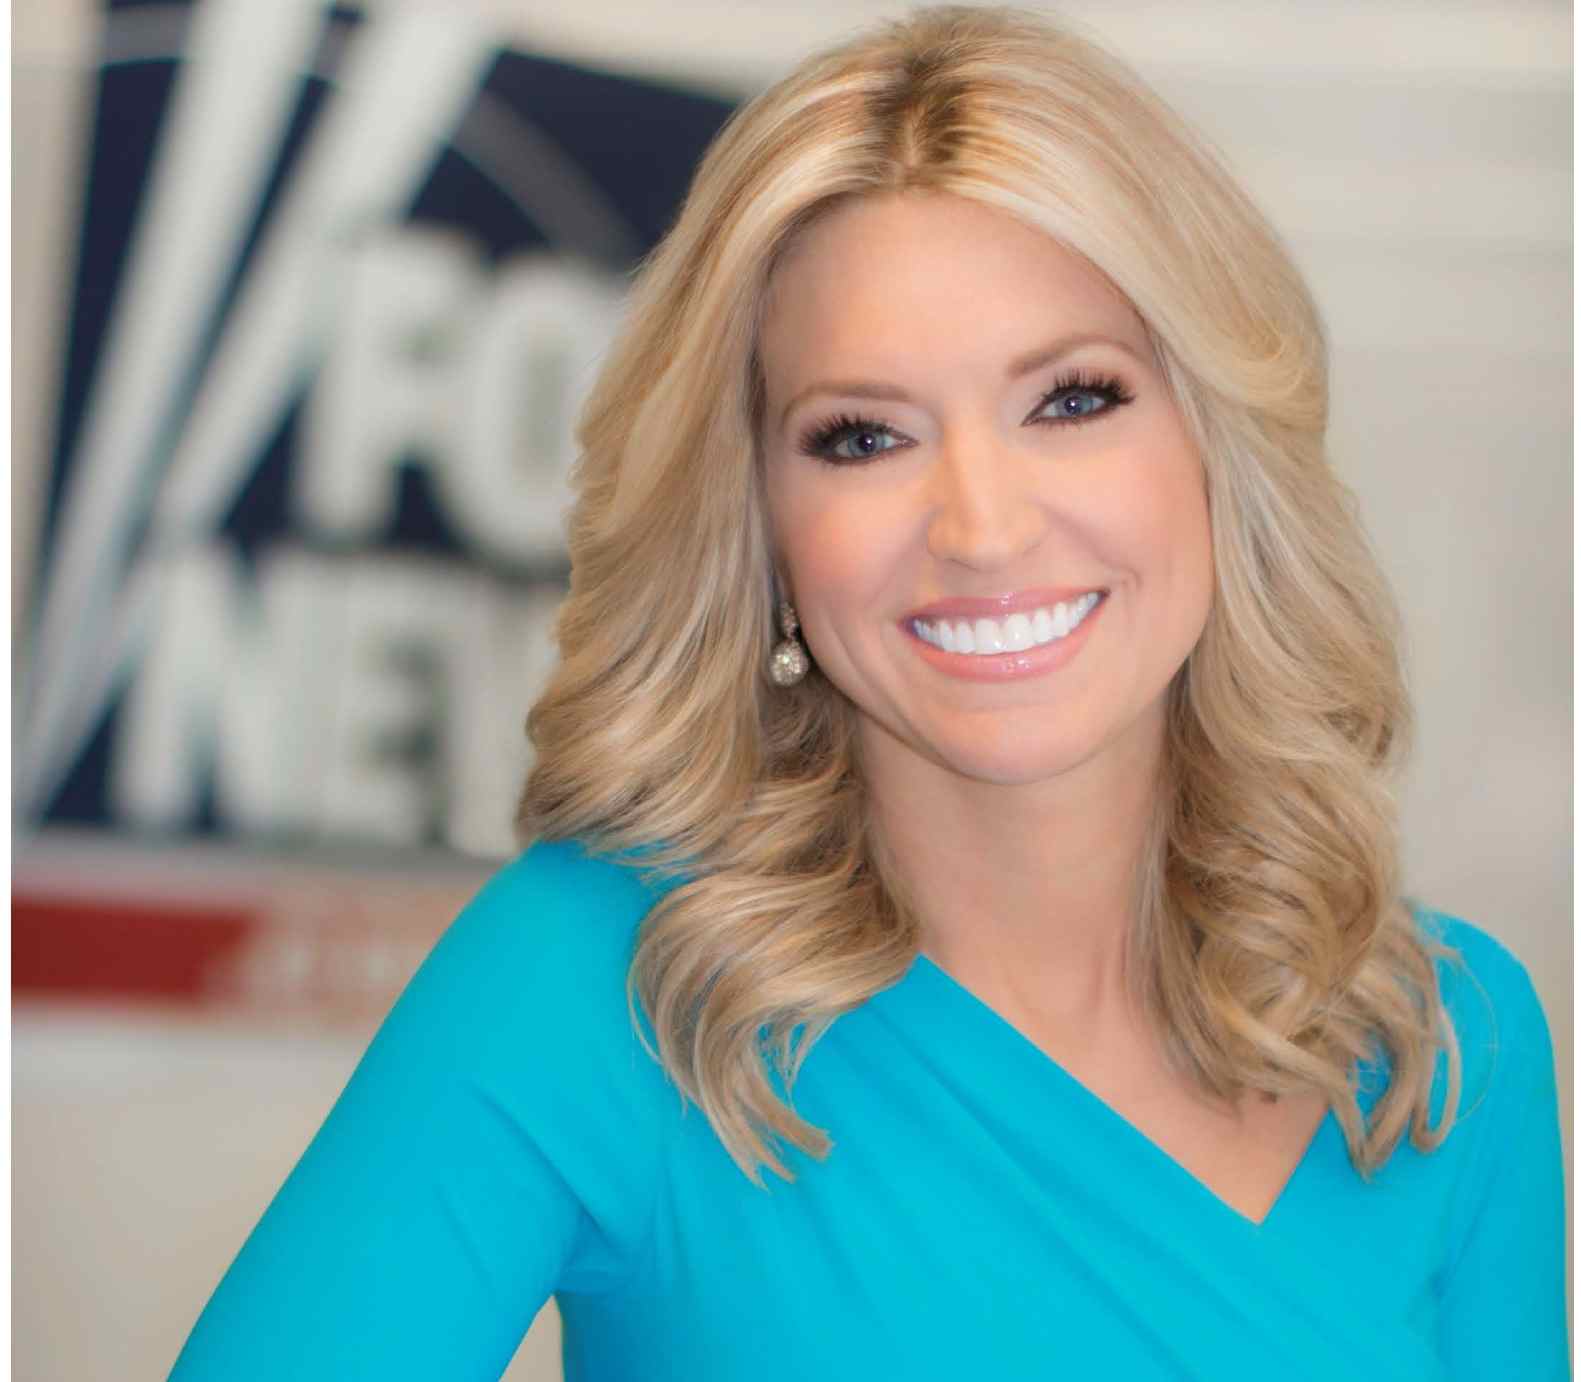 Image of American Television personality, Ainsley Earhardt